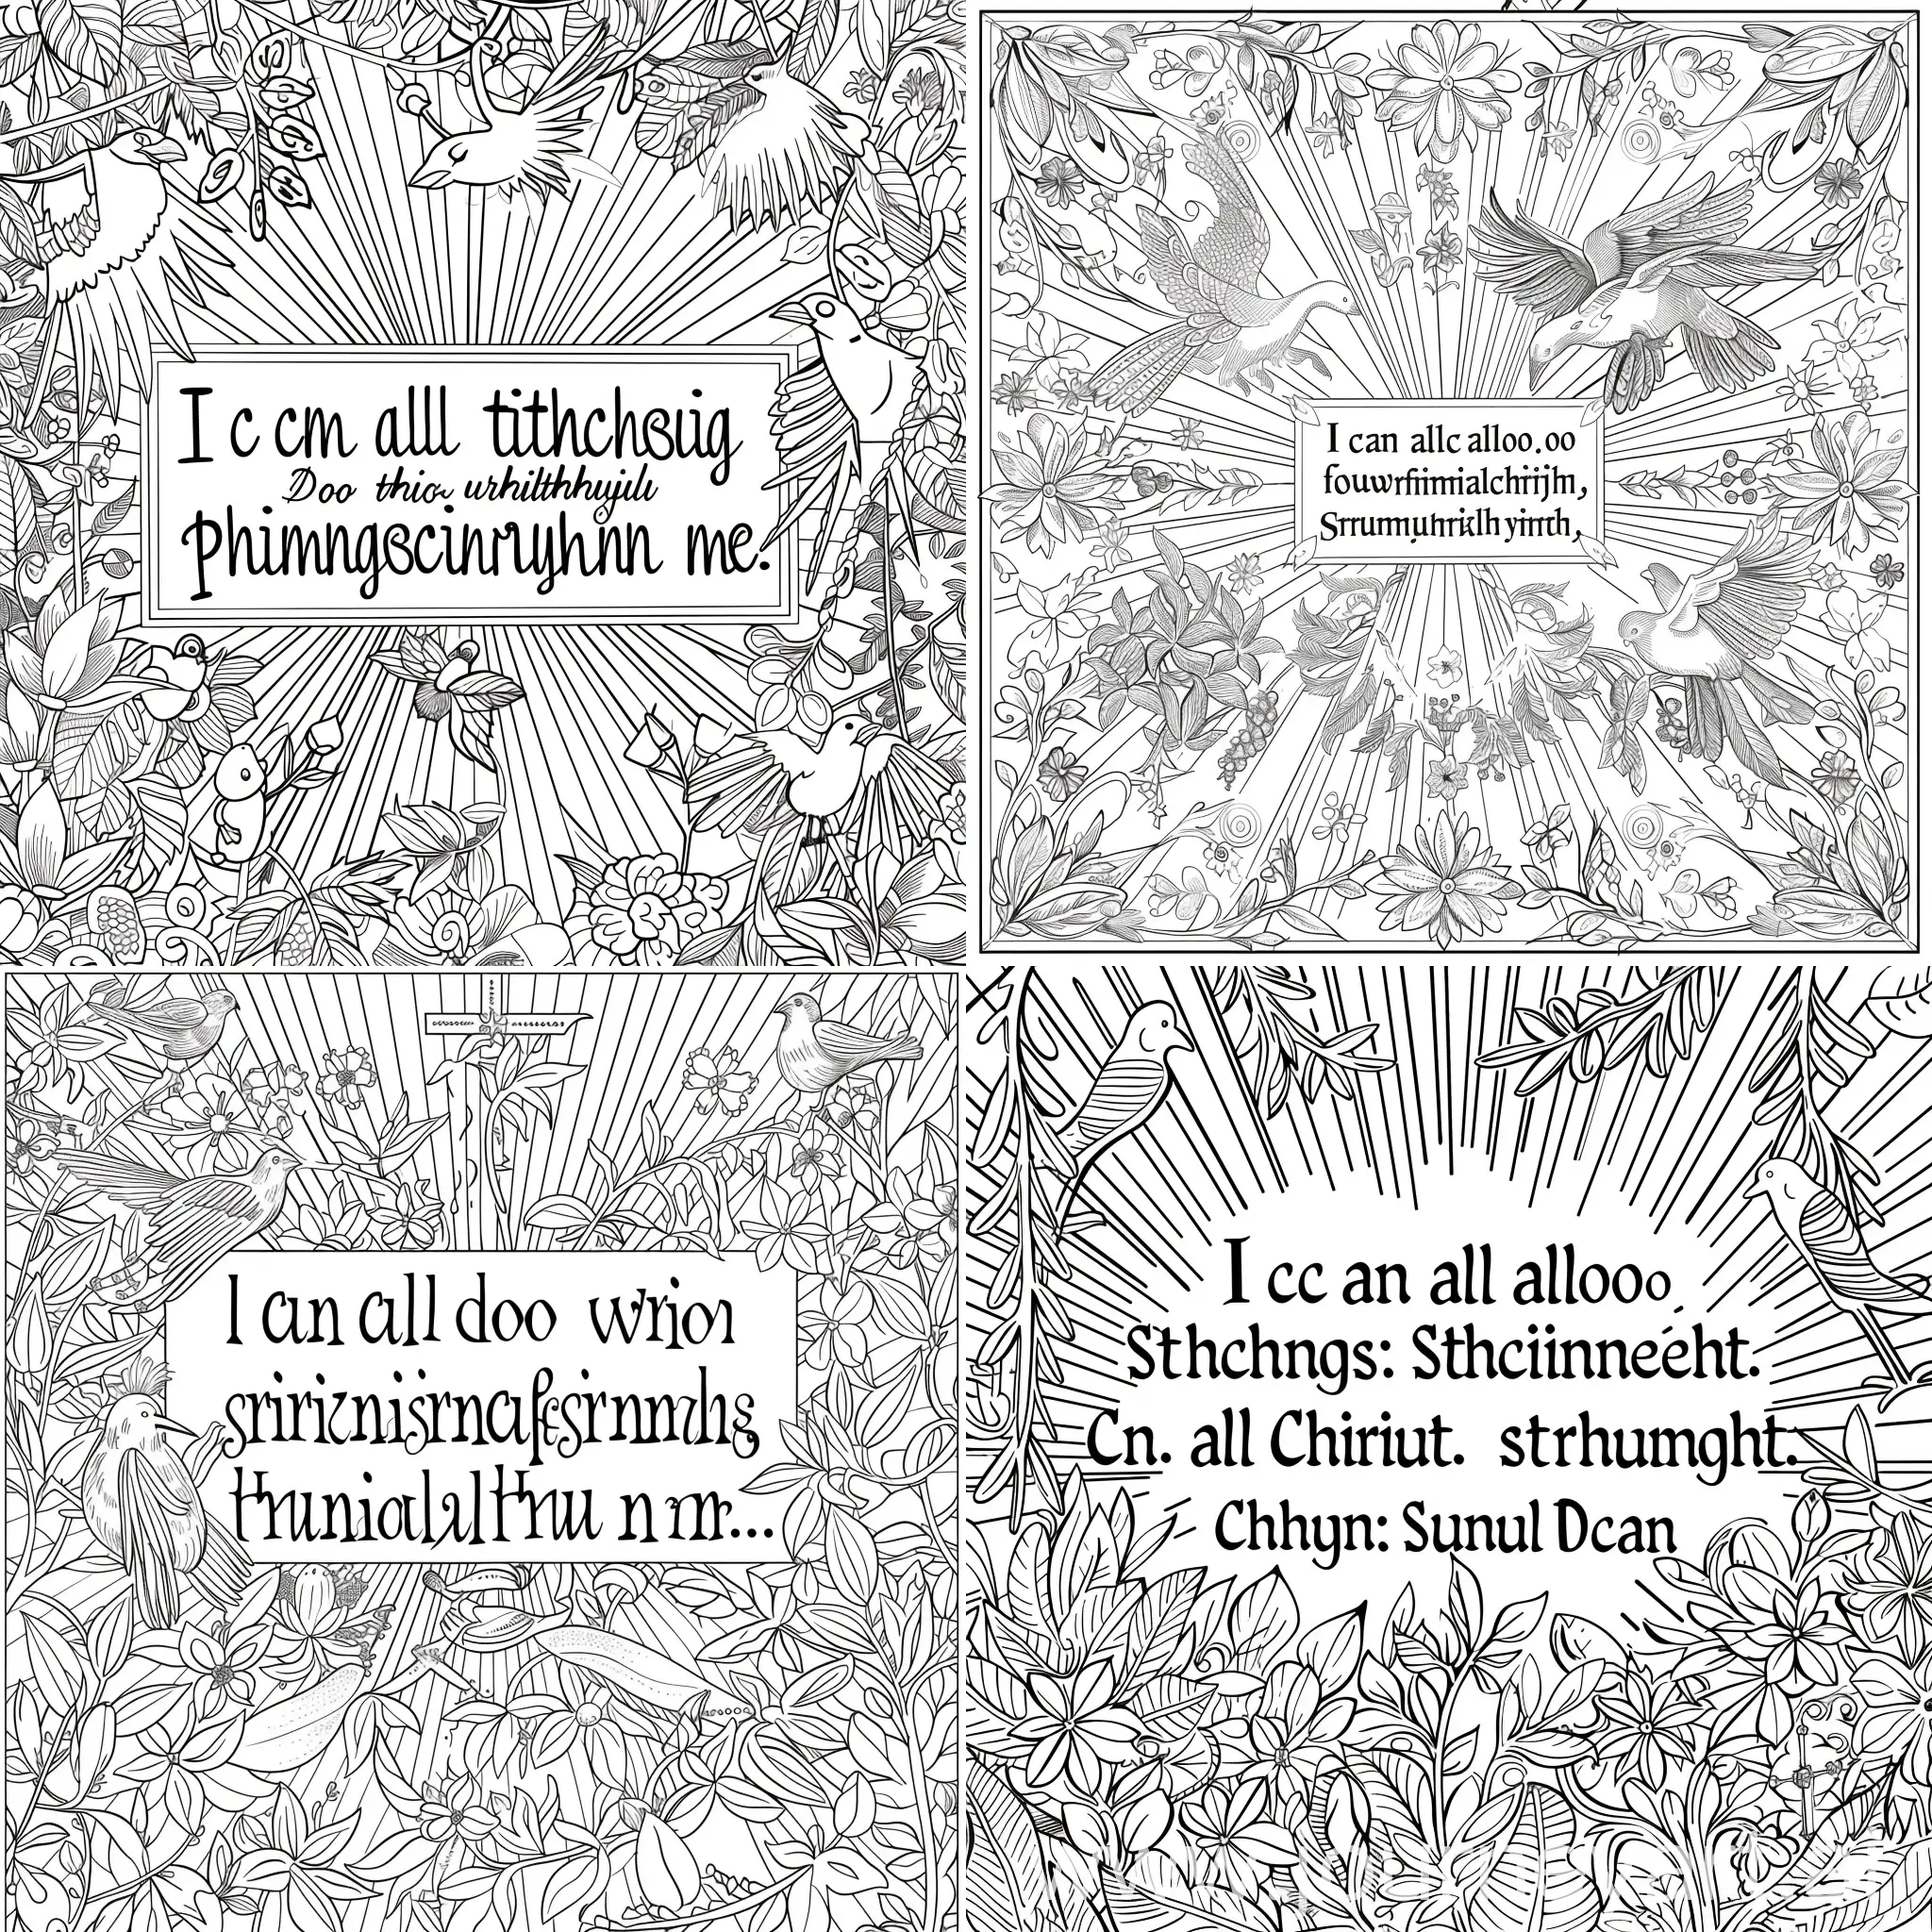 Create a coloring page design centered around the inspirational biblical text "I can do all things through Christ which strengtheneth me - Philippians 4:13." Place the text prominently in the center of the page, surrounded by intricate and uplifting patterns. Incorporate elements such as:  Floral motifs Vine and leaf patterns Soaring birds Sunrays or beams of light Crosses or other Christian symbols The design should be detailed and engaging, providing a calming and reflective coloring experience.